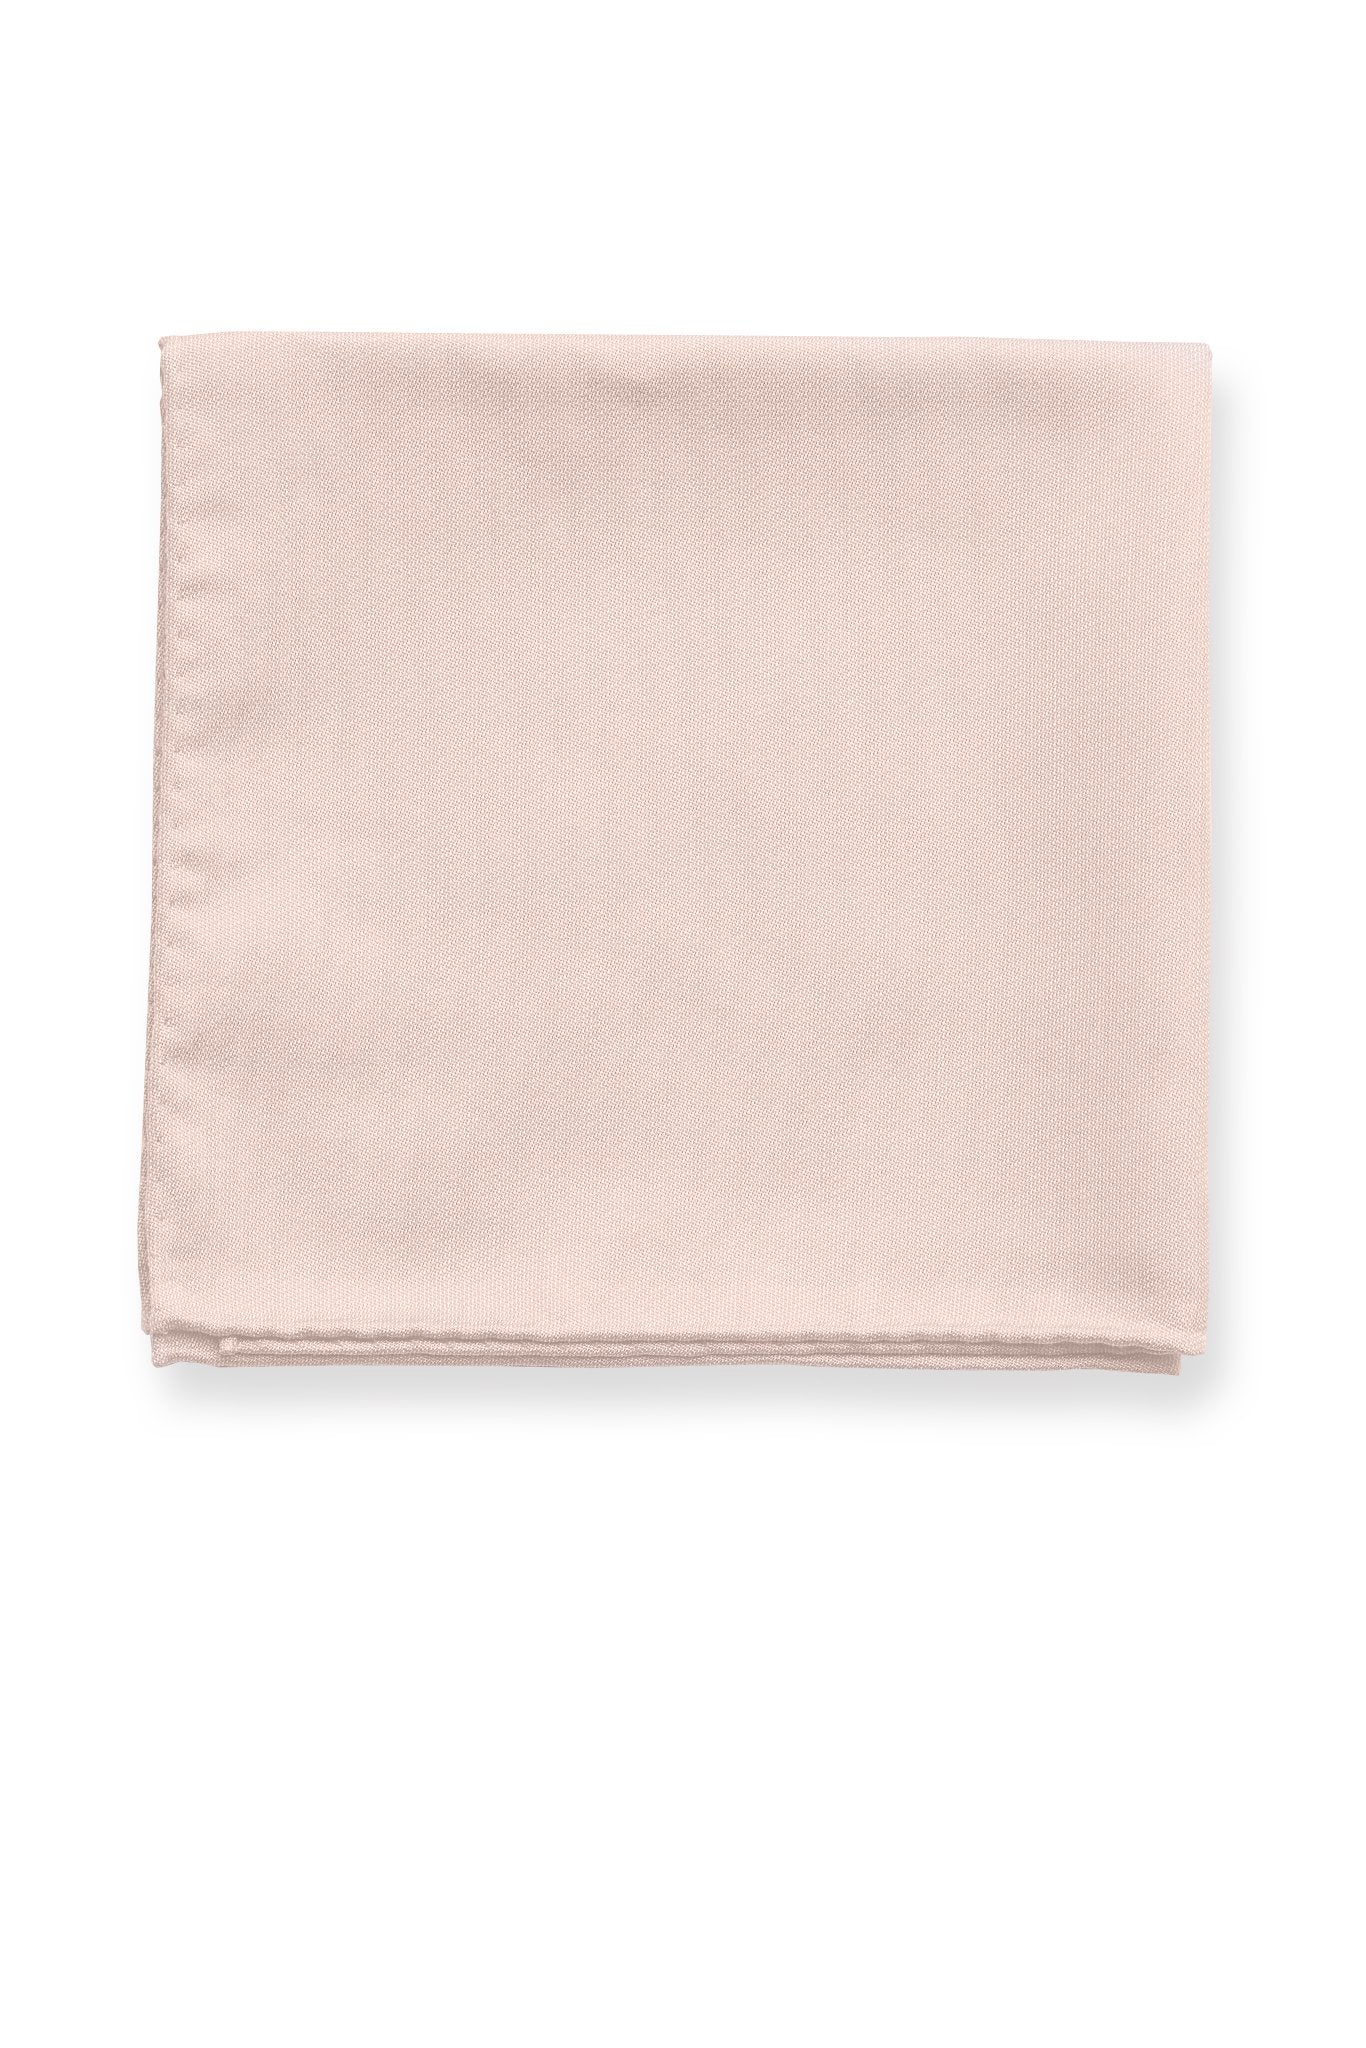 Didi Pocket Square in pale blush by Birdy Grey, front view